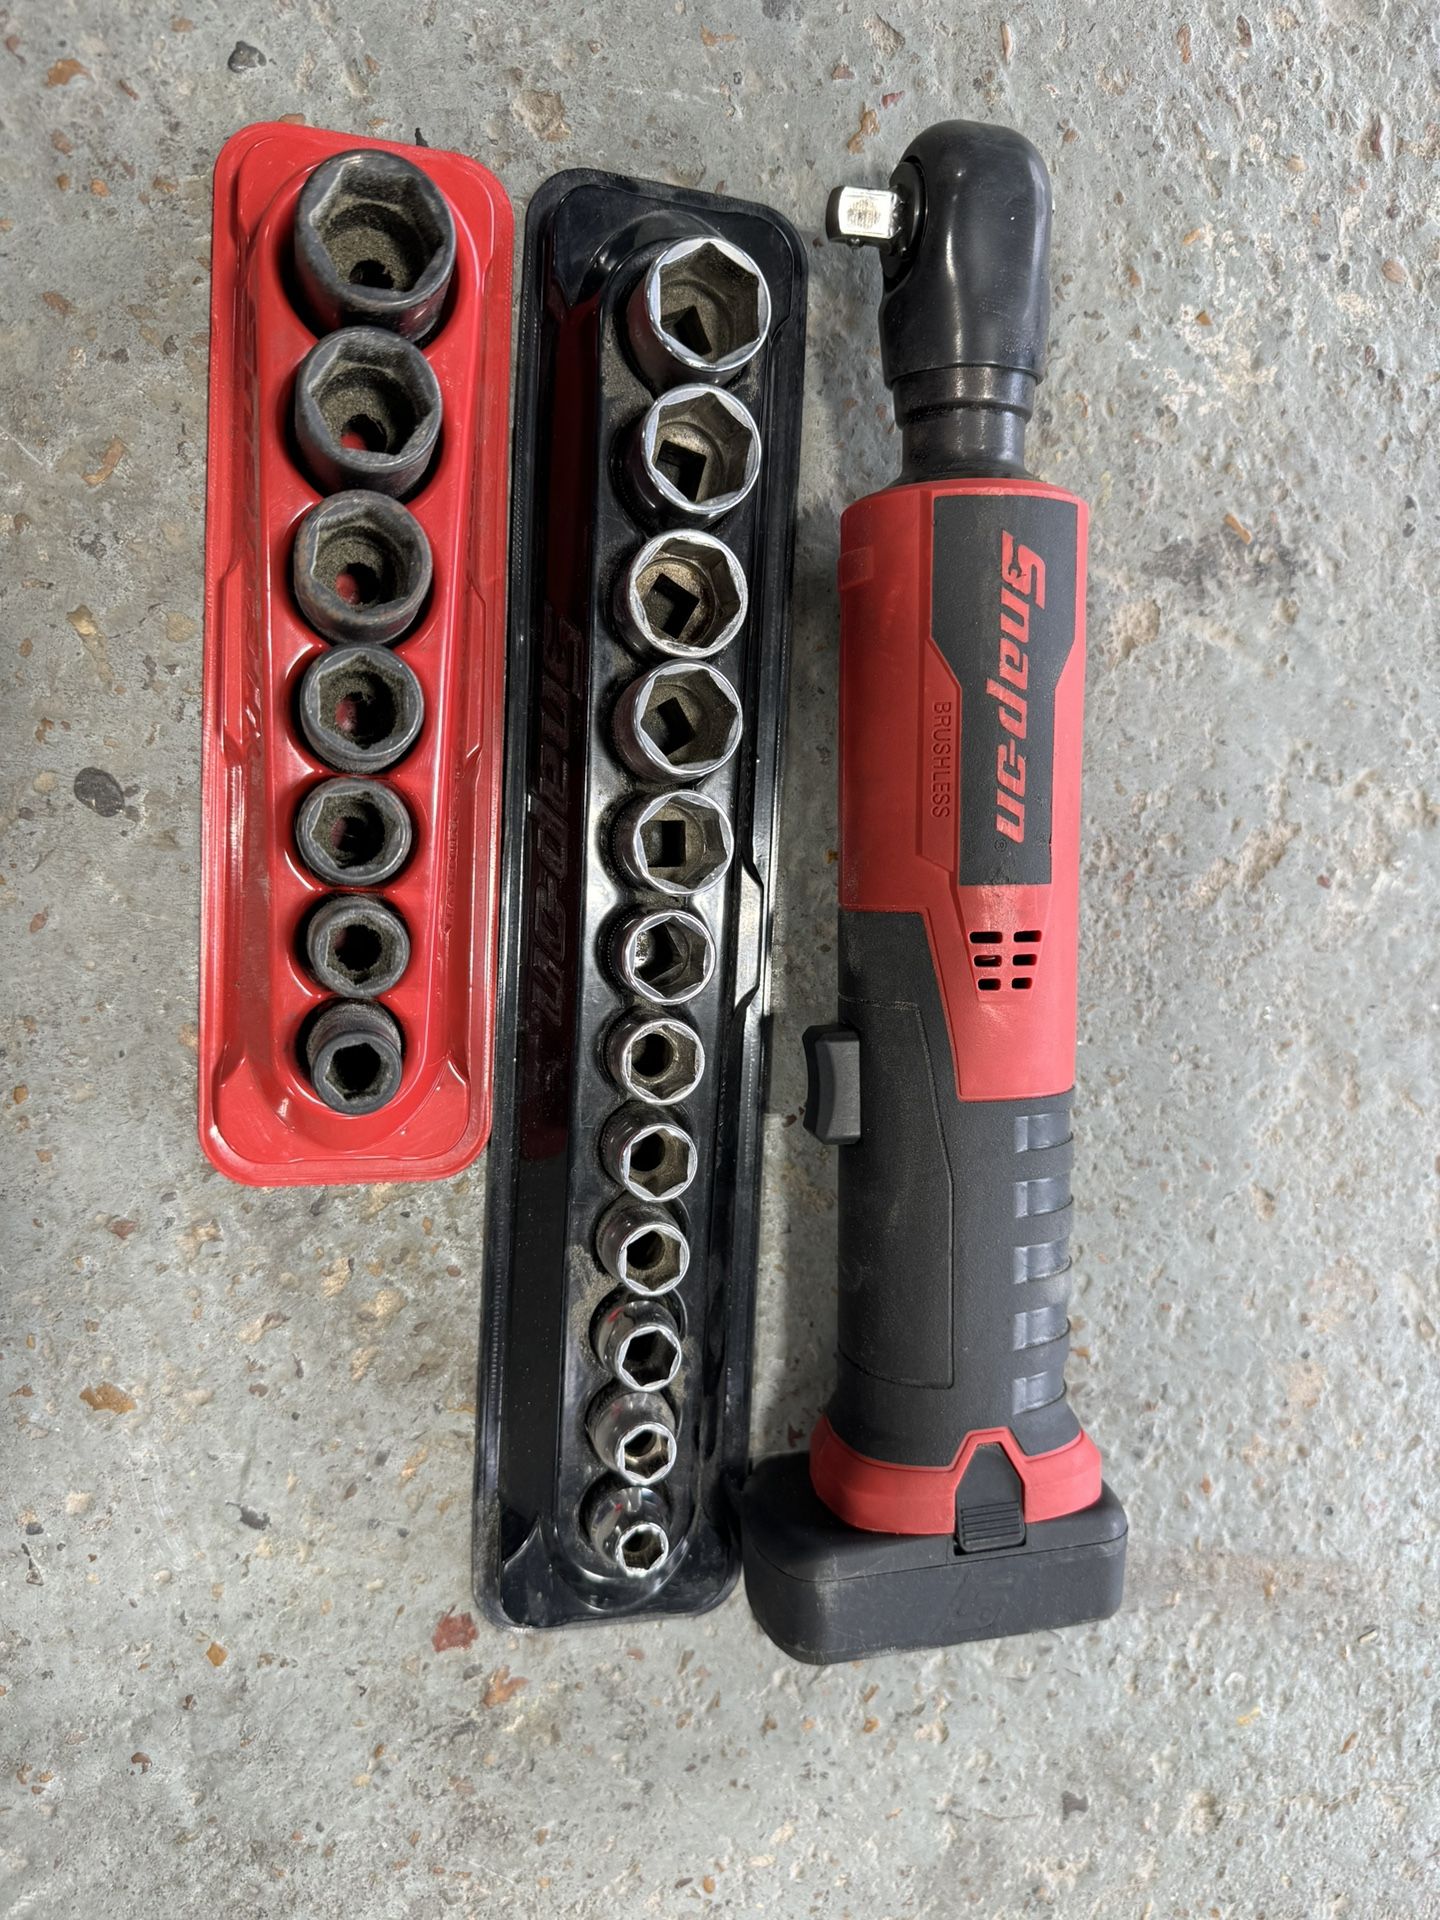 SNAP ON 3/8 RATCHET WITH SOCKETS